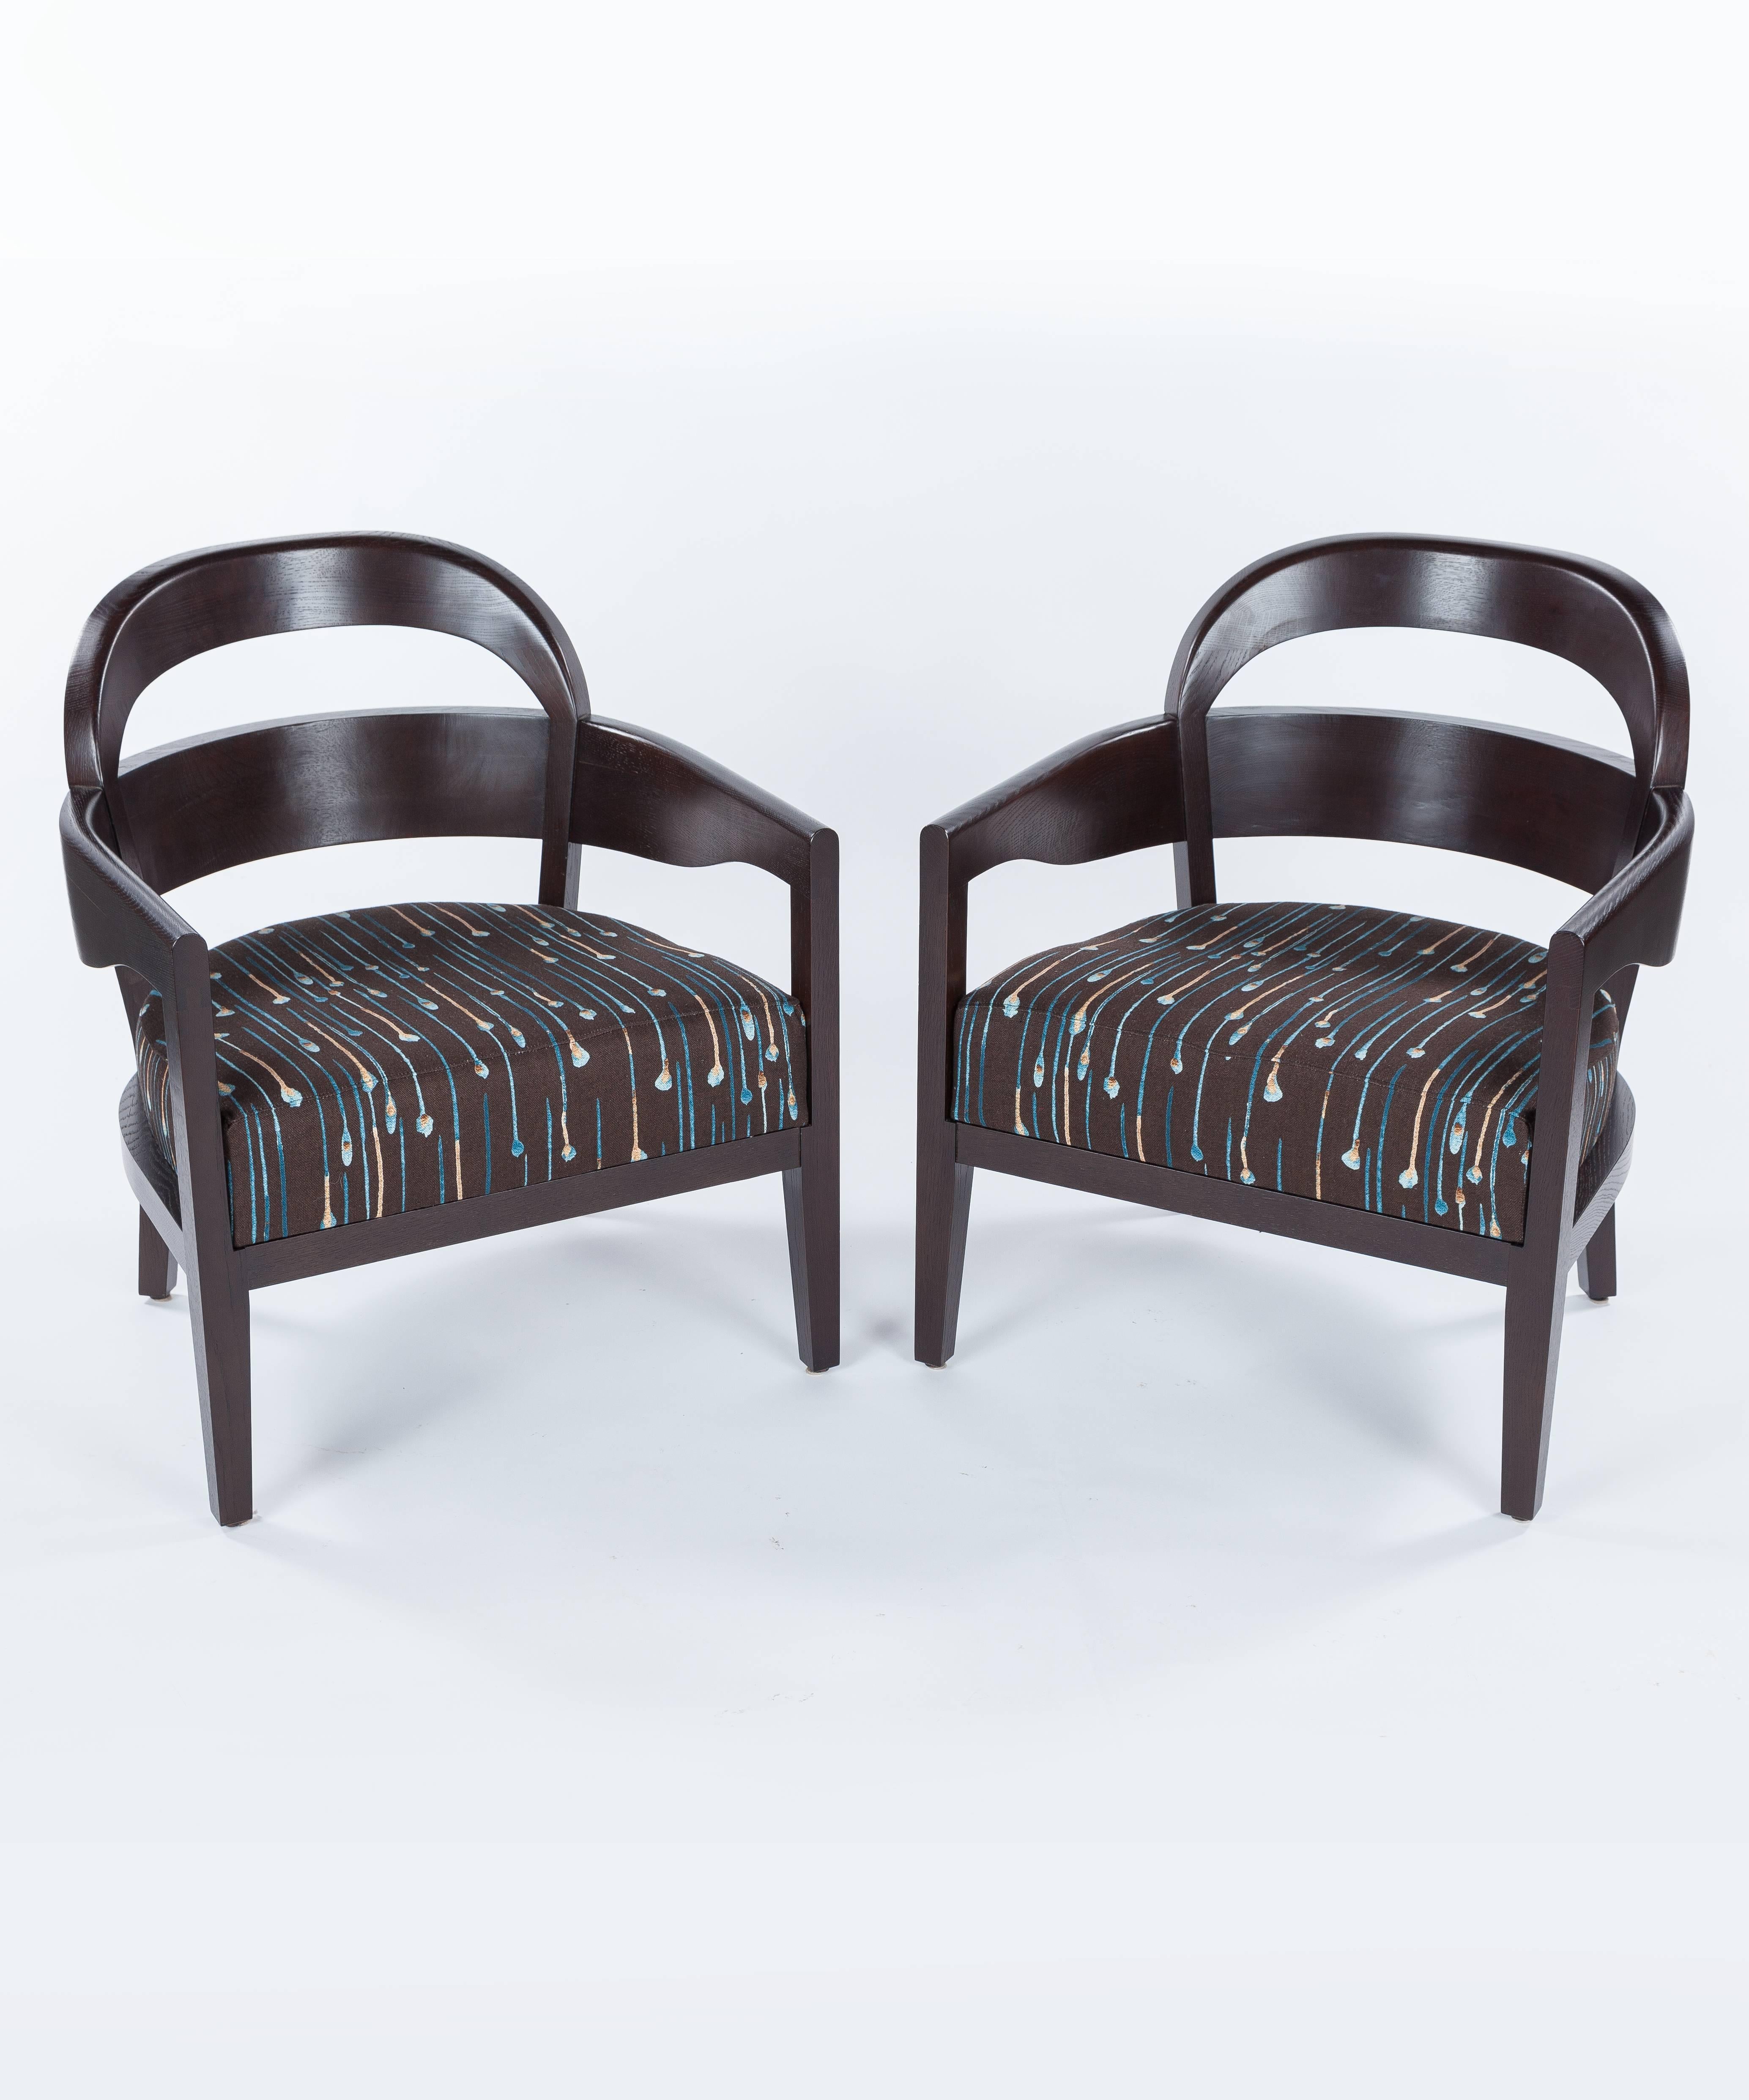 A pair of Mid-Century Modern in the style of Jiun Ho Mopane lounge chairs dating to the late 20th century. Featuring Rift Sawn oak and re-upholstered in a Jim Thompson linen fabric. Each chair measures approximately 26